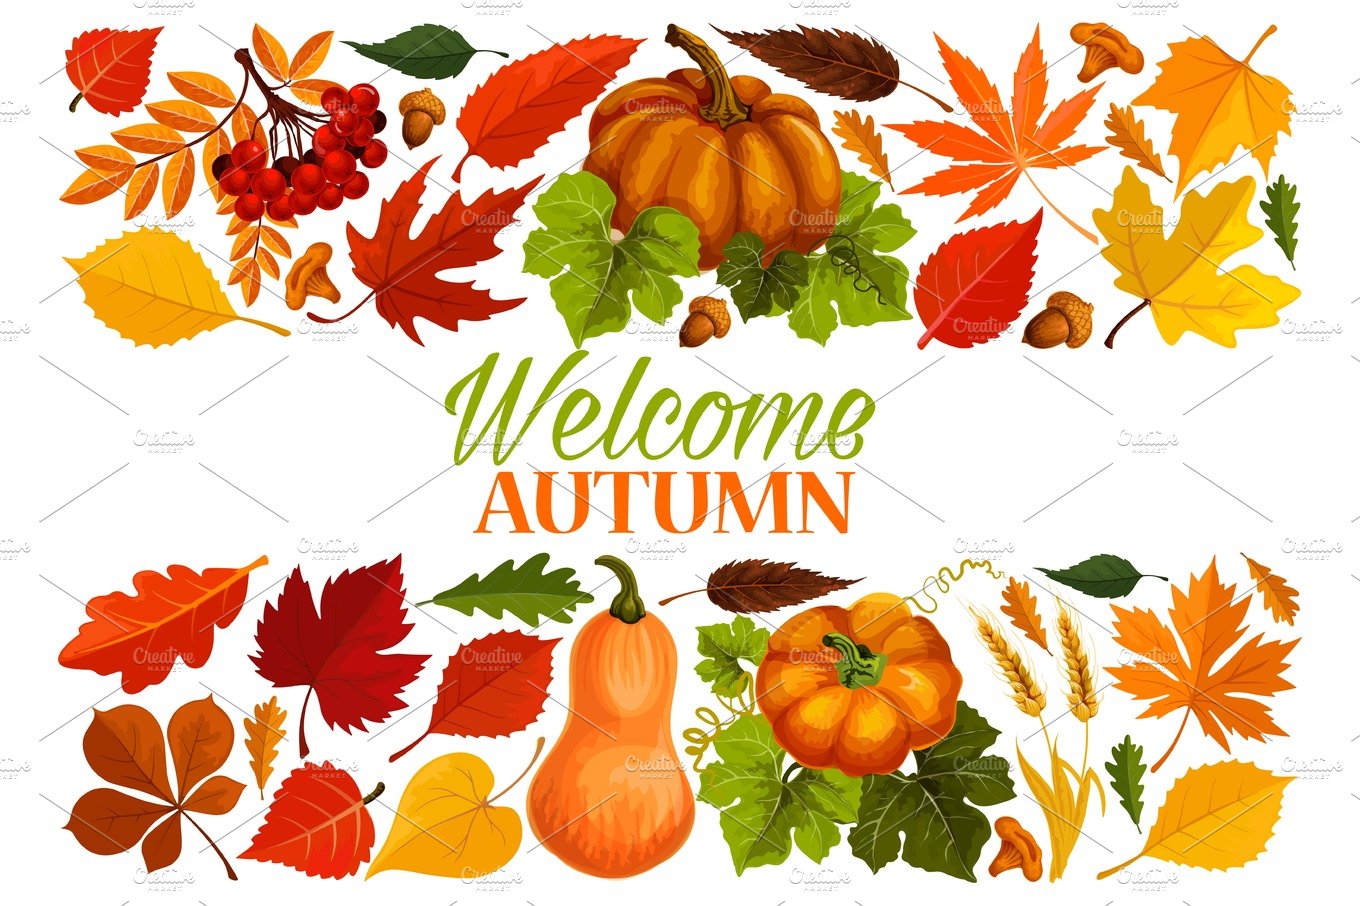 Autumn banner with border of fall leaf, pumpkin cover image.